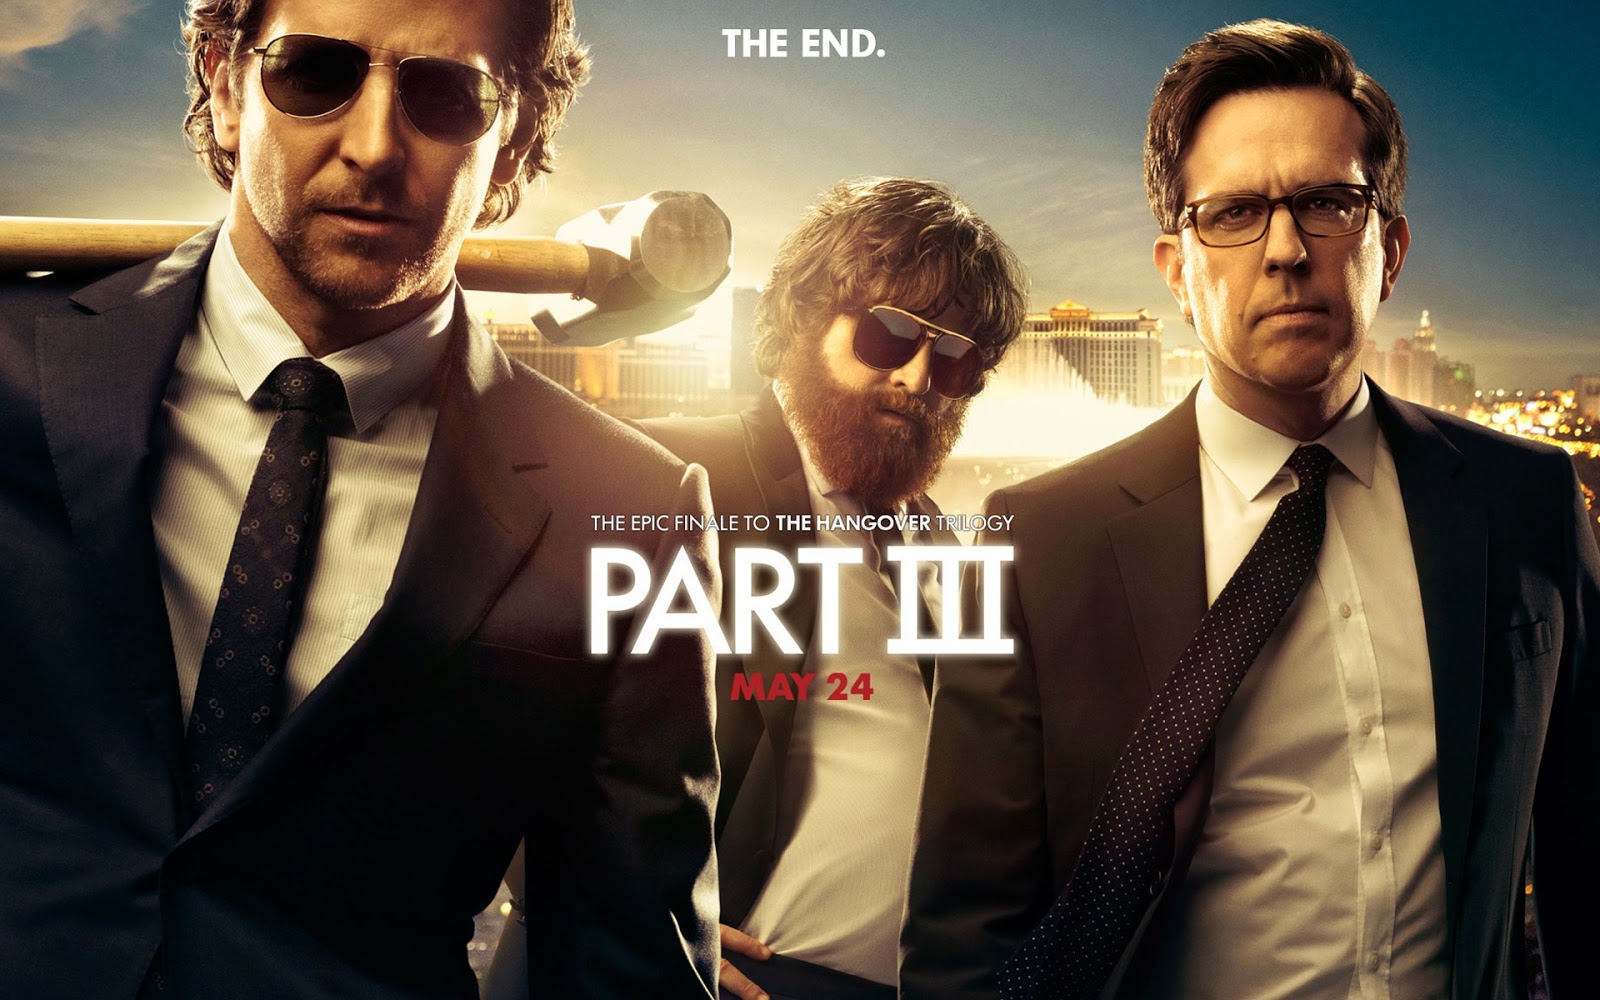 The Hangover III Trailer Is Here, and I'm in Love With These Crazy